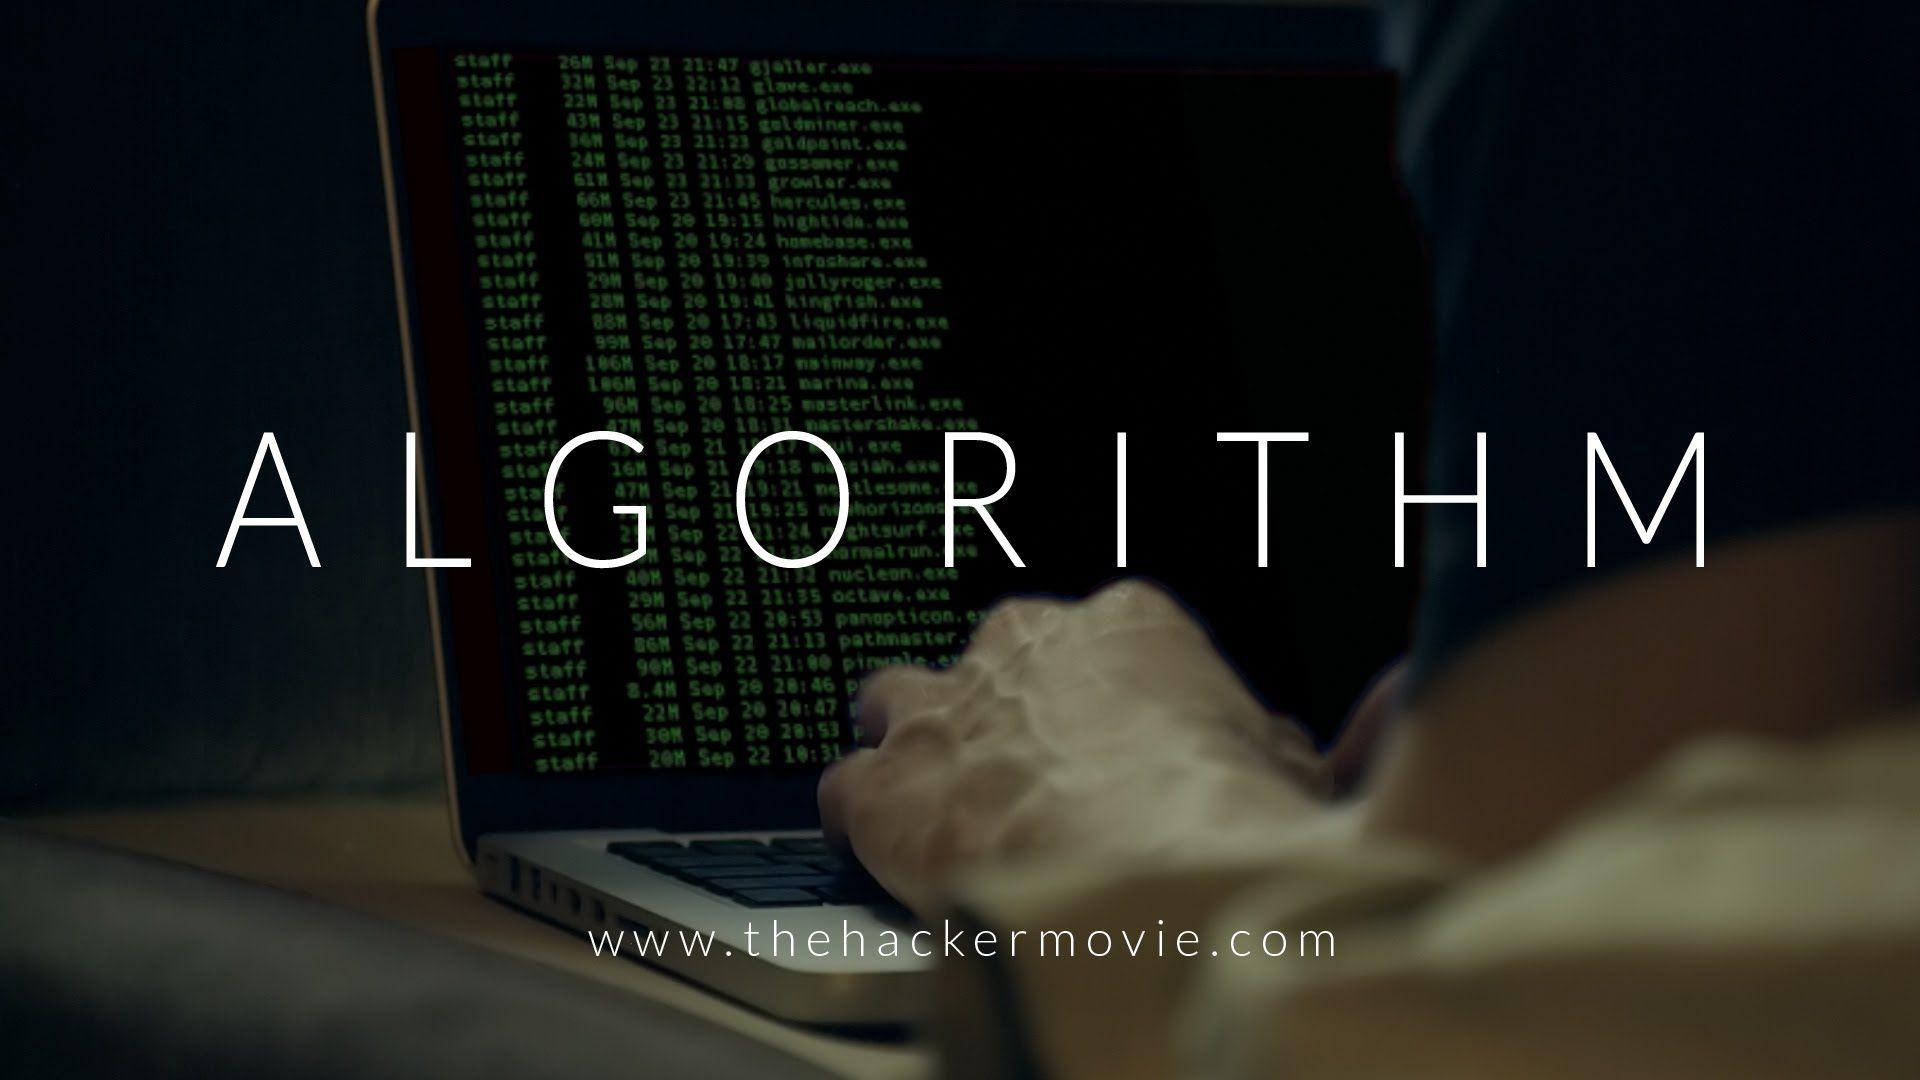 ALGORITHM: The Hacker Movie. Full Length Film About A Hacker Who